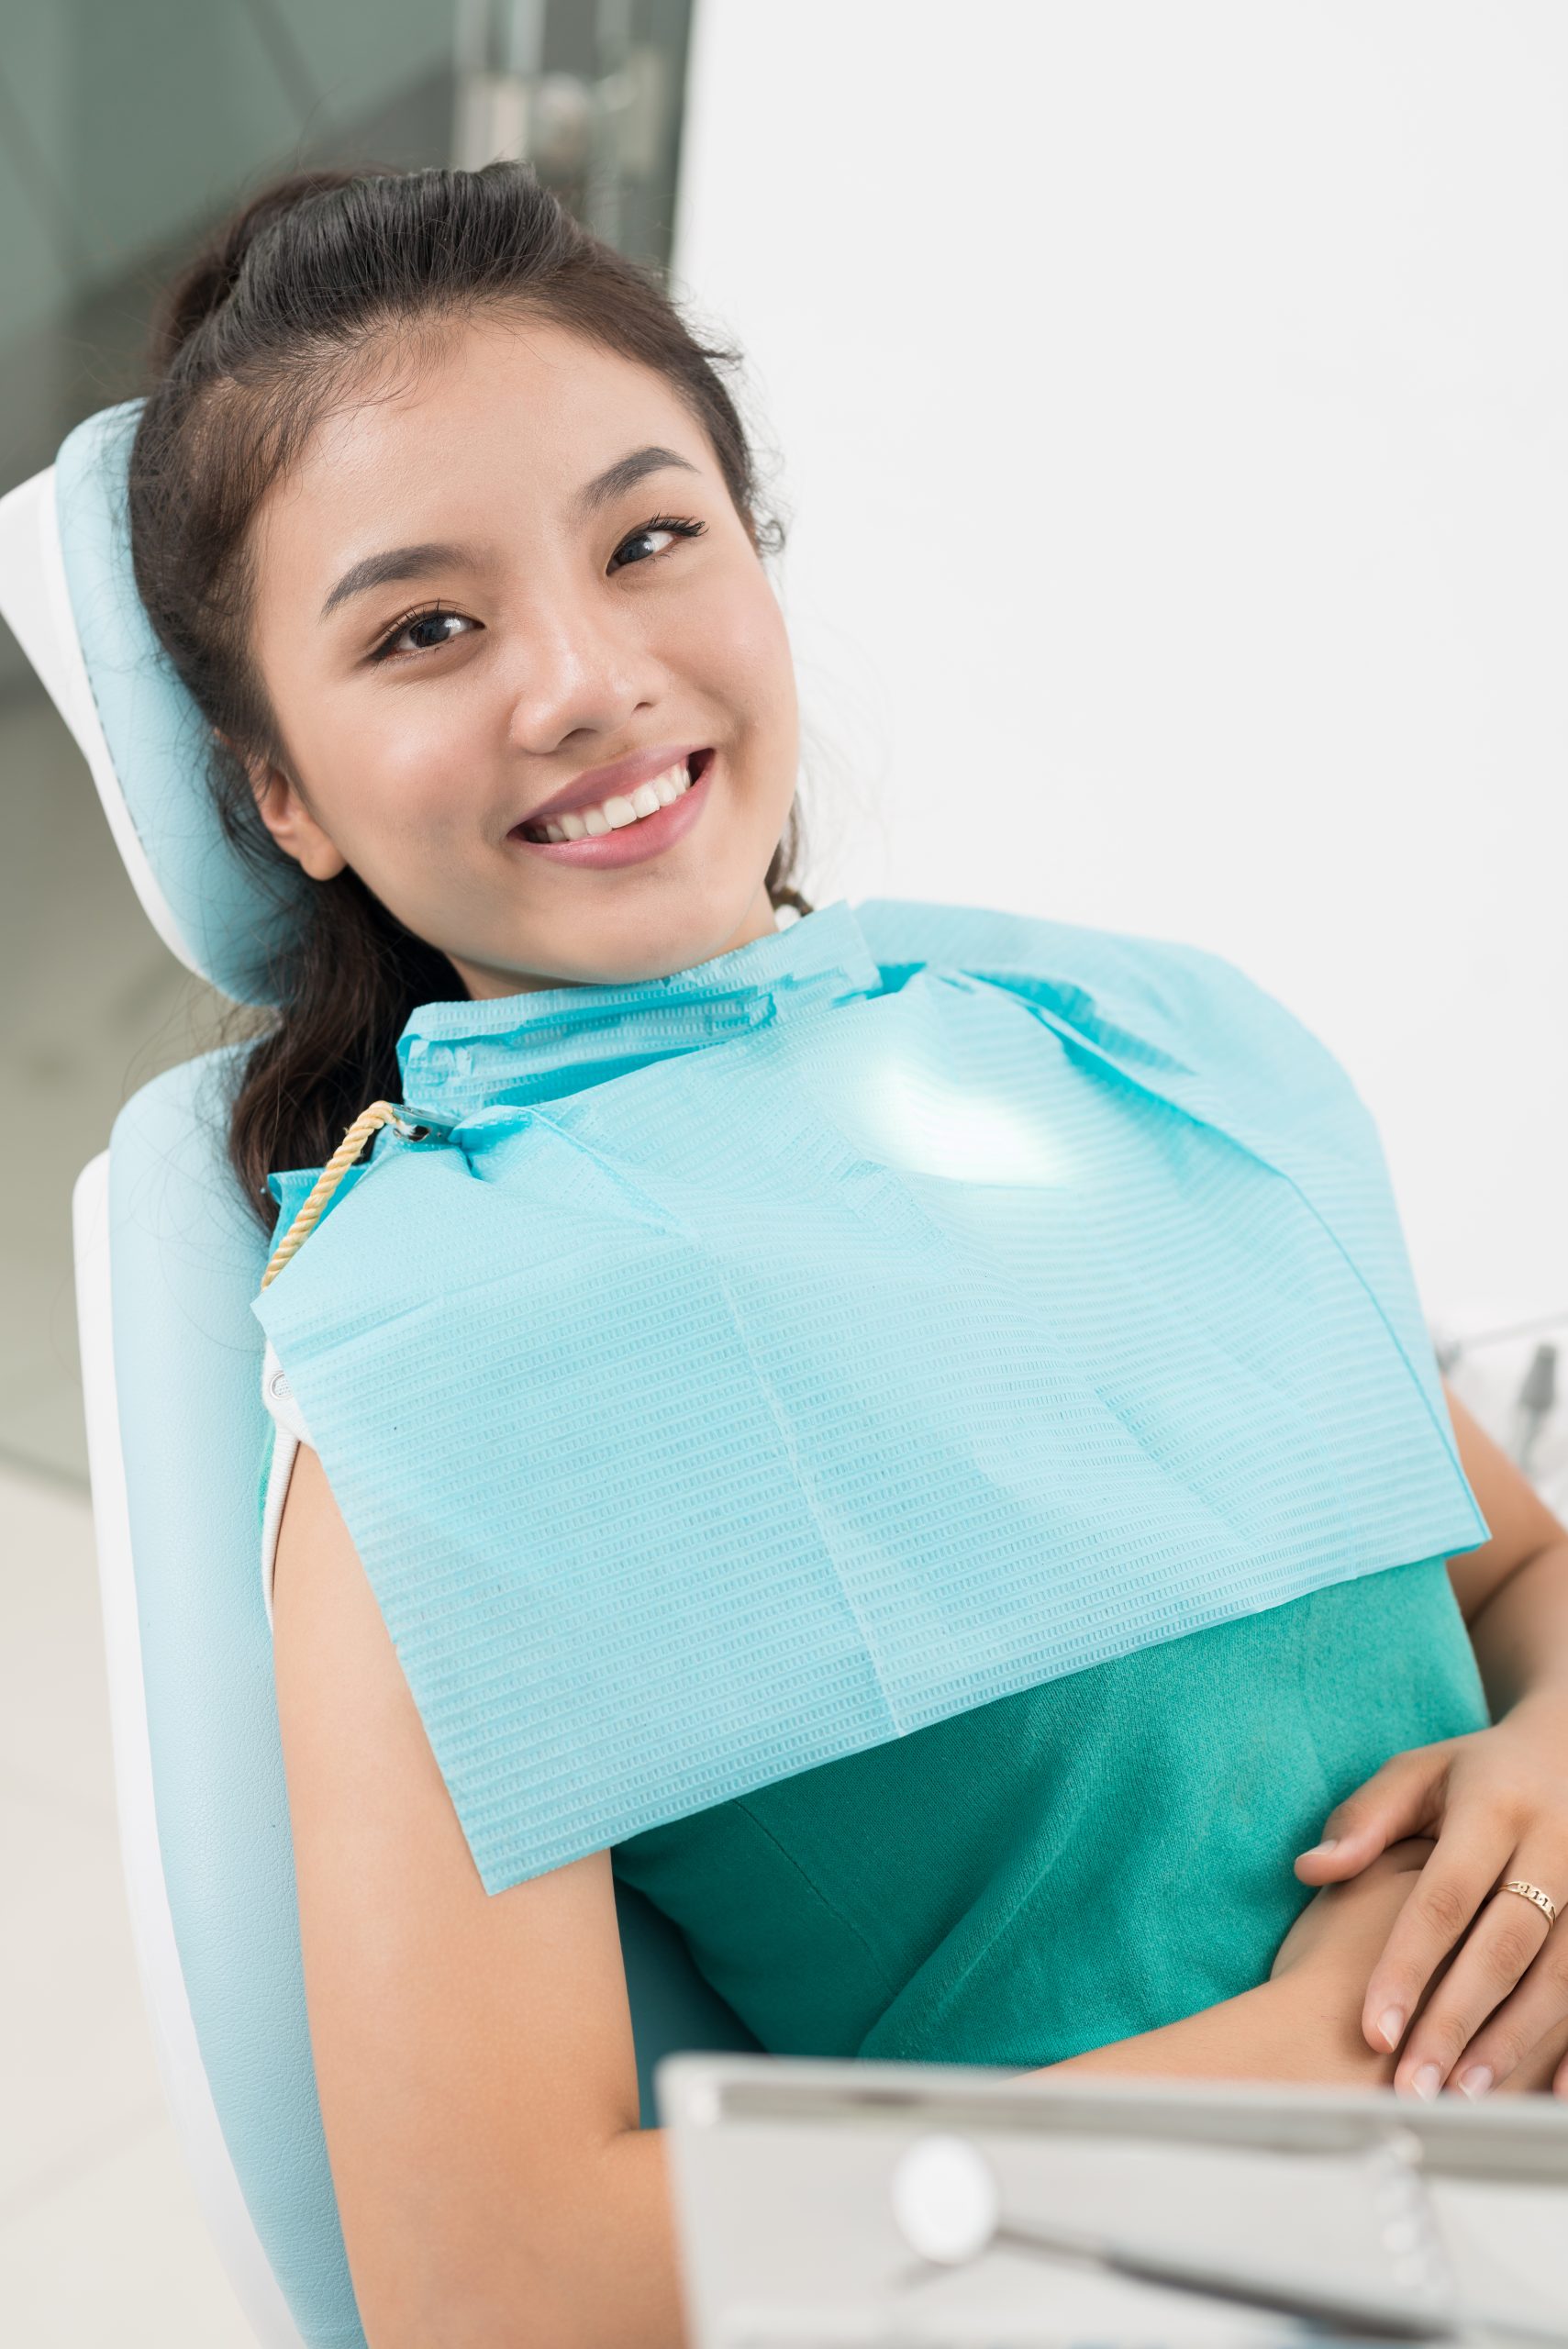 Monrovia Dental Cleaning And Exams